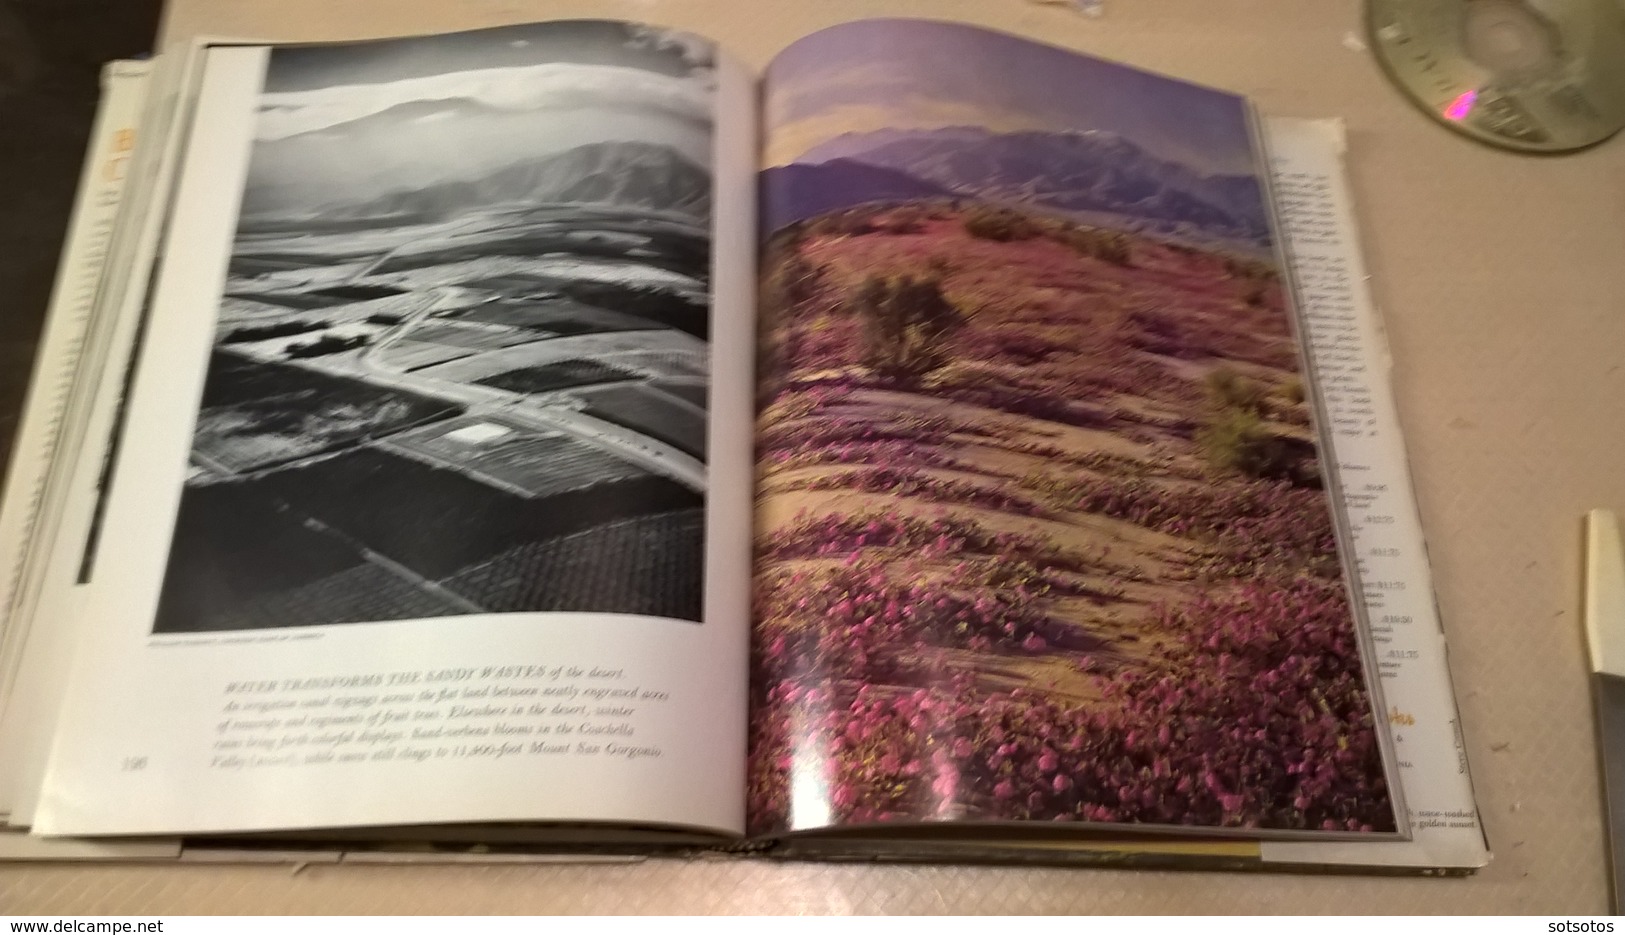 BEAUTIFUL CALIFORNIA - A SunsetPictorial by the Editors of Sunset Booksand Sunset Magazine (1969) 288 illustrated pages